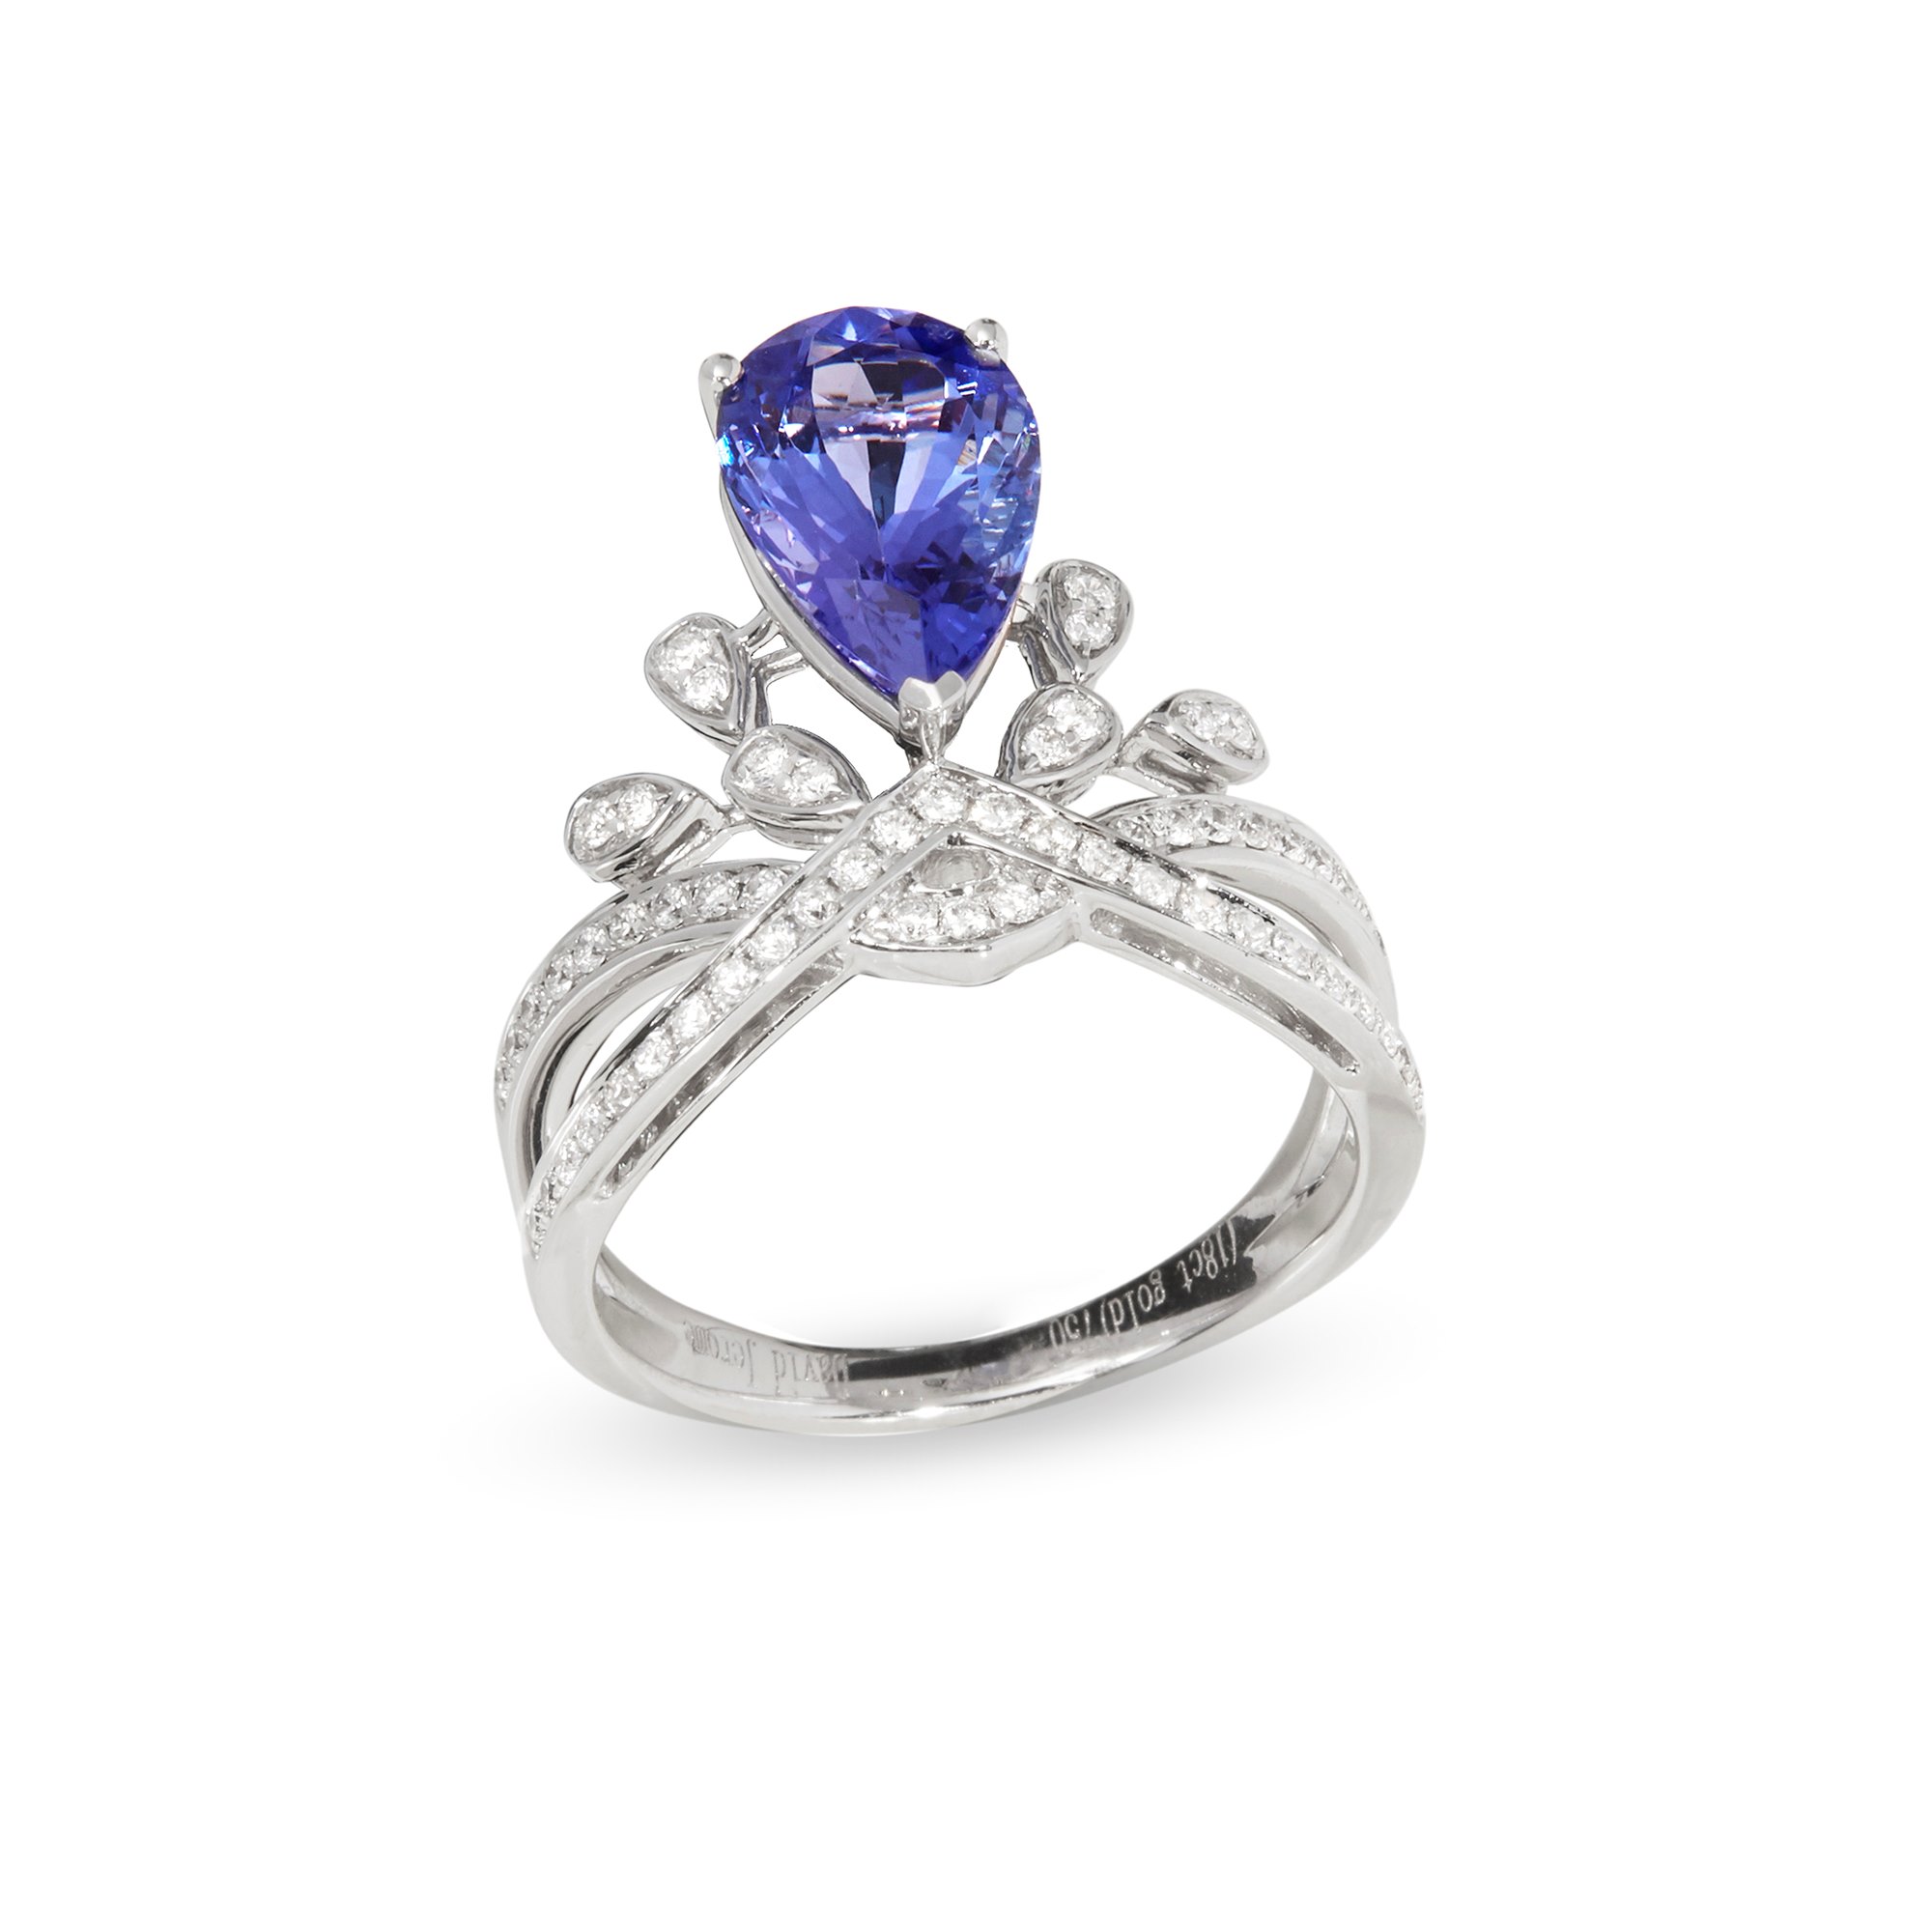 David Jerome Certified 2.7ct Untreated Pear Cut Tanzanite and Diamond 18ct Gold Ring